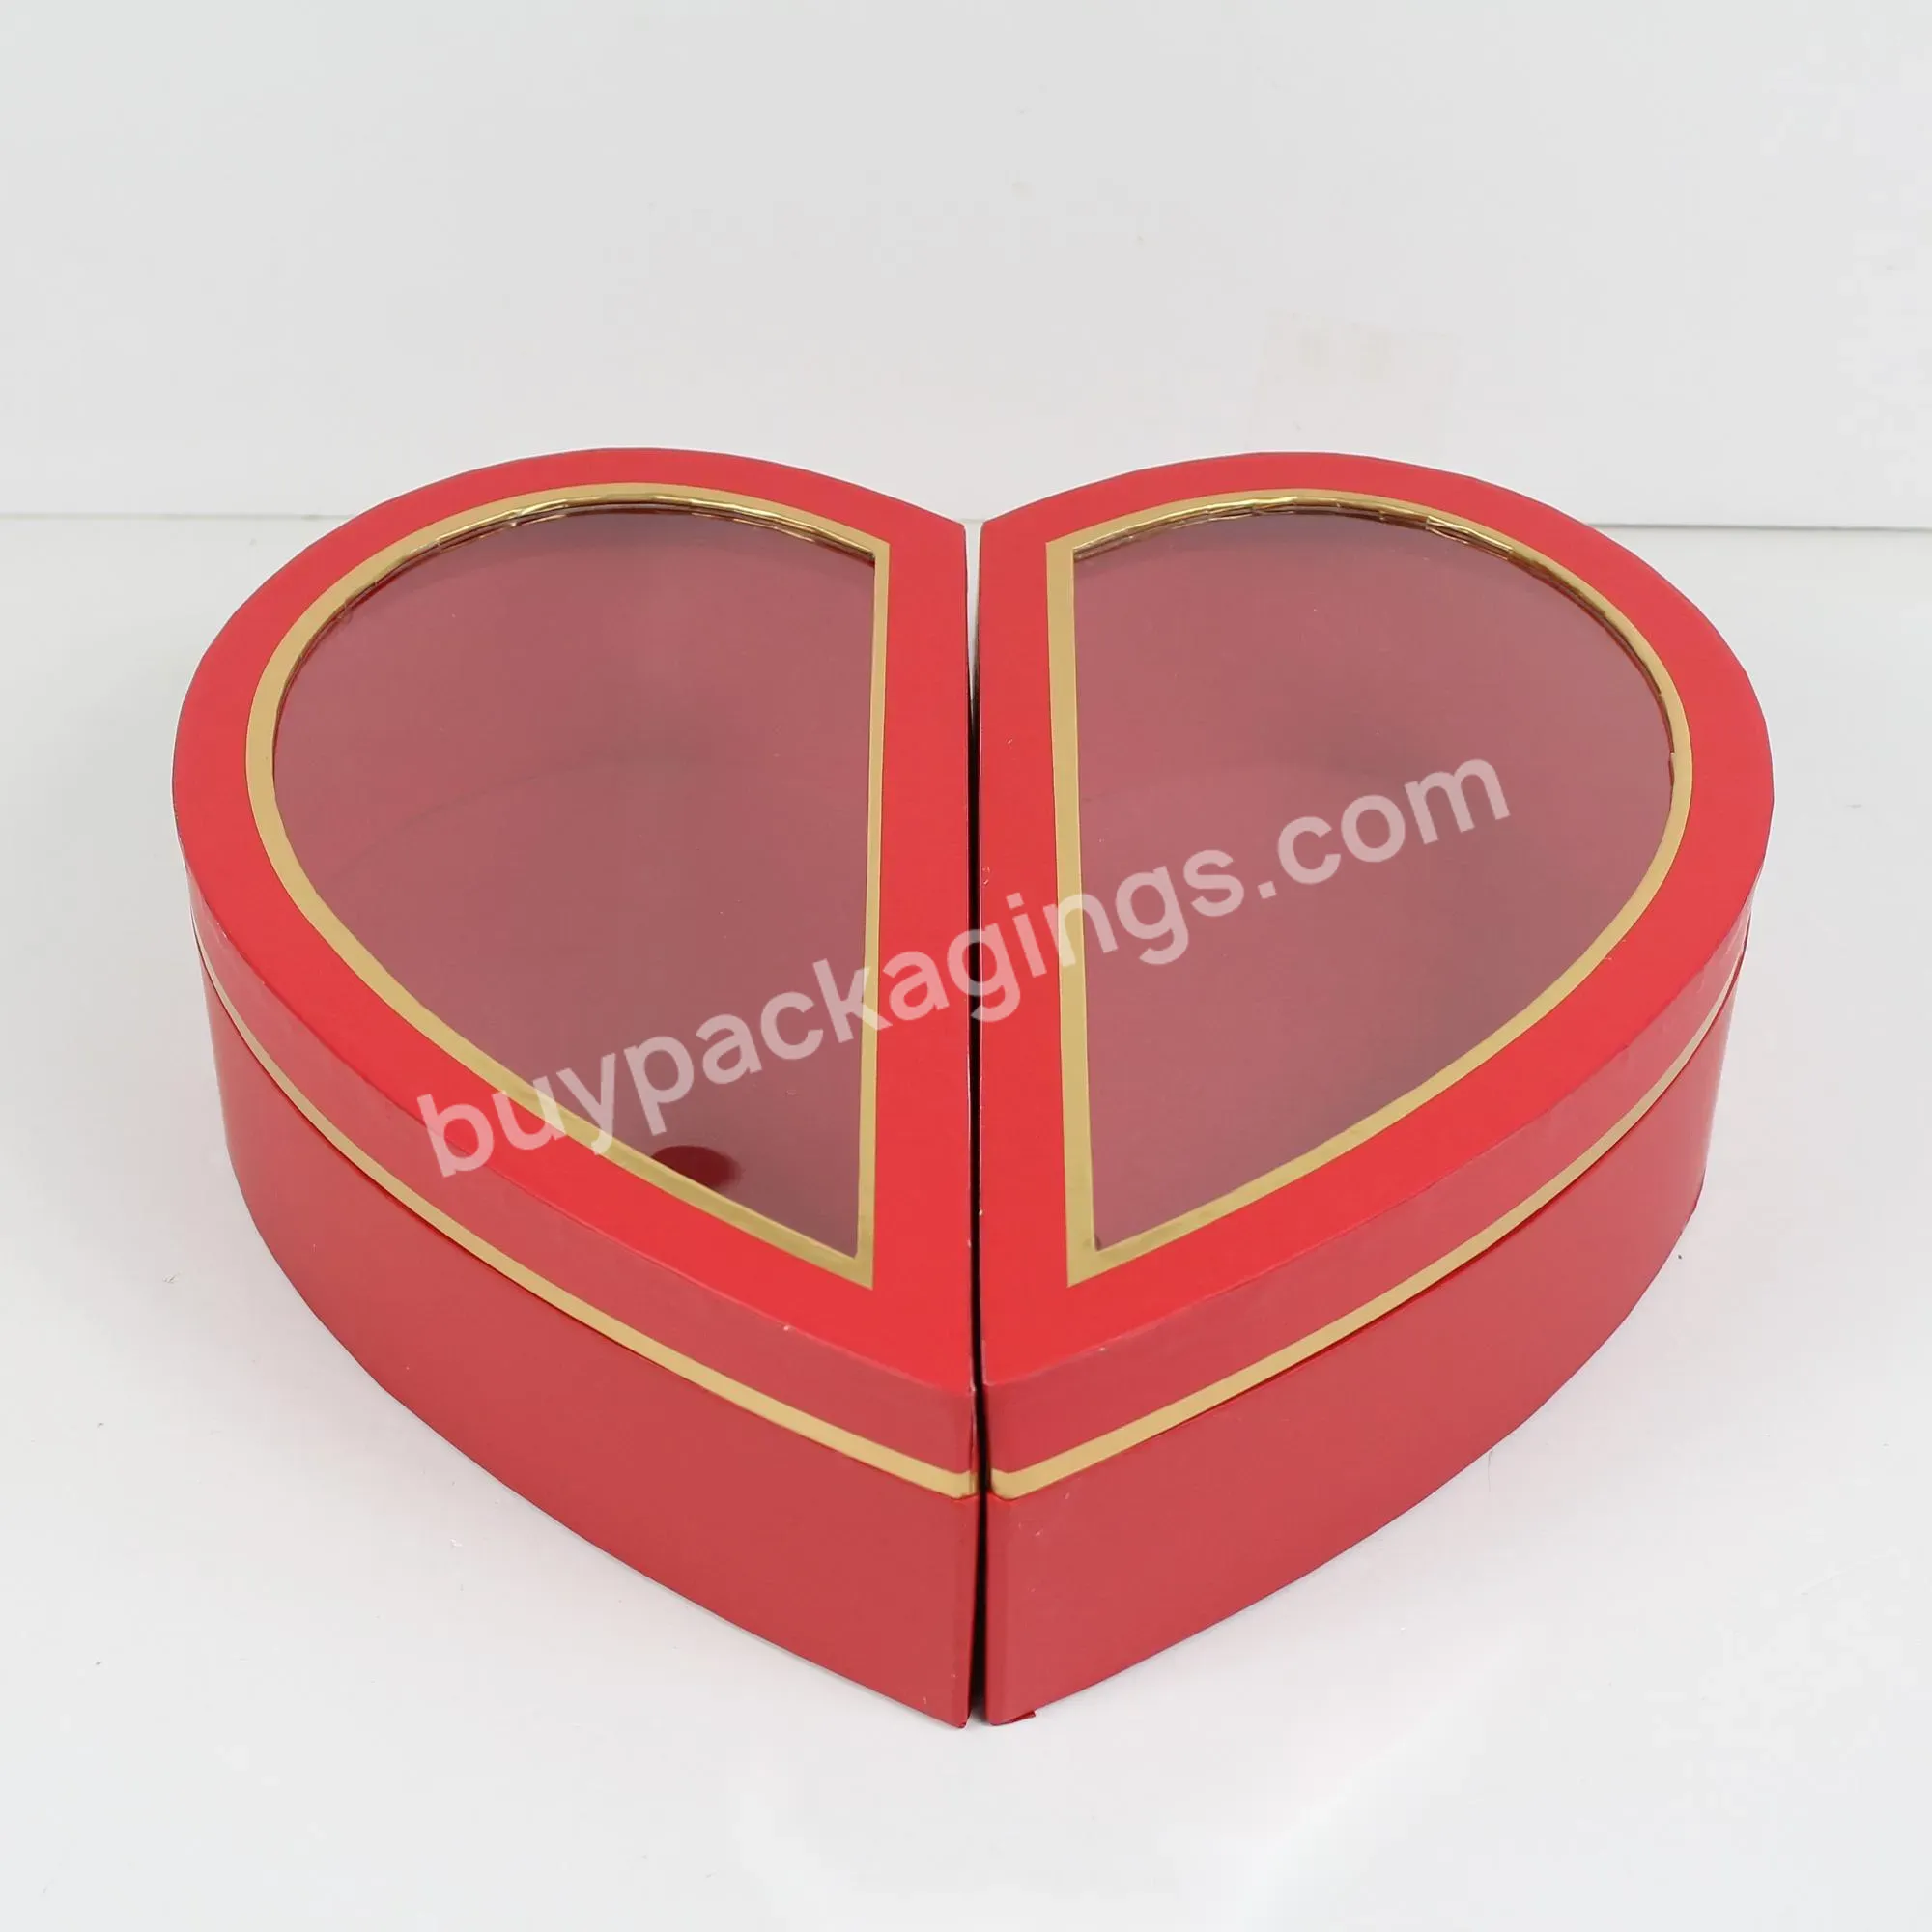 New Arrival 2pcs/set Heart Shaped Flower Gift Paper Box Magnetic Gift Box With Pvc Window - Buy 2pcs/set Heart Shaped Flower Gift Paper Box,Gift Paper Box,Magnetic Gift Box With Pvc Window.